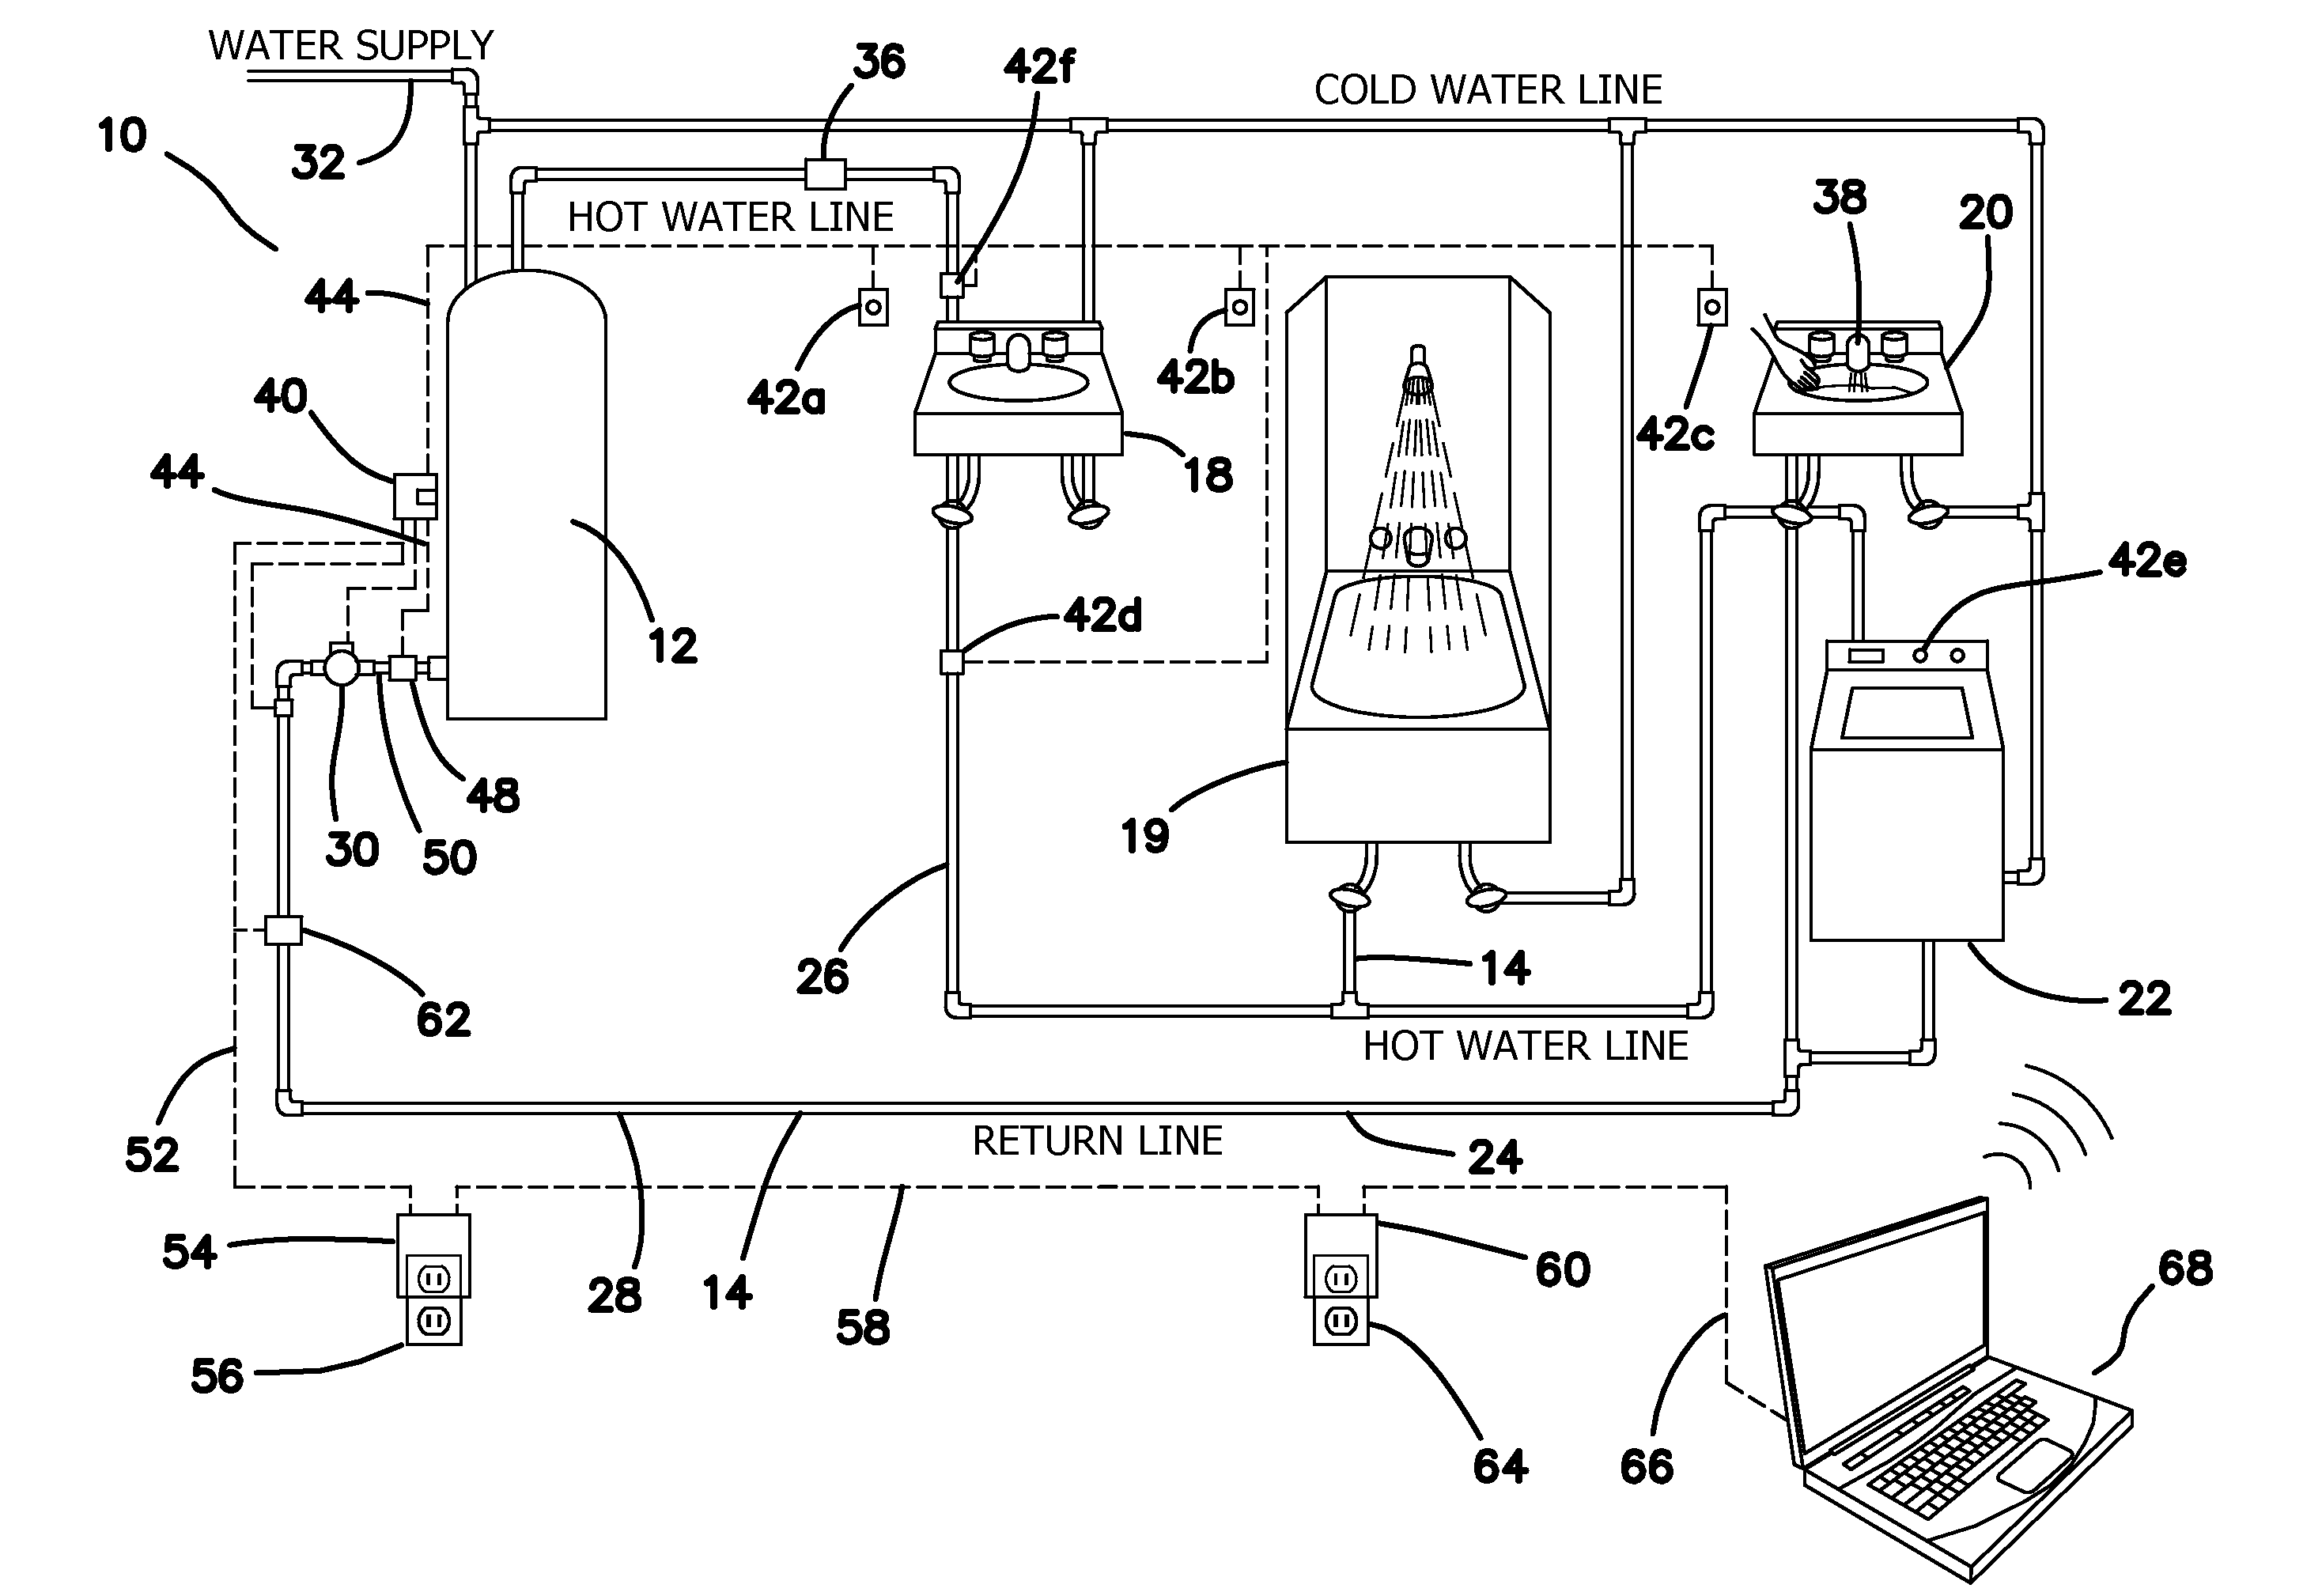 Methods and Apparatus for Remotely Monitoring and/or Controlling a Plumbing System